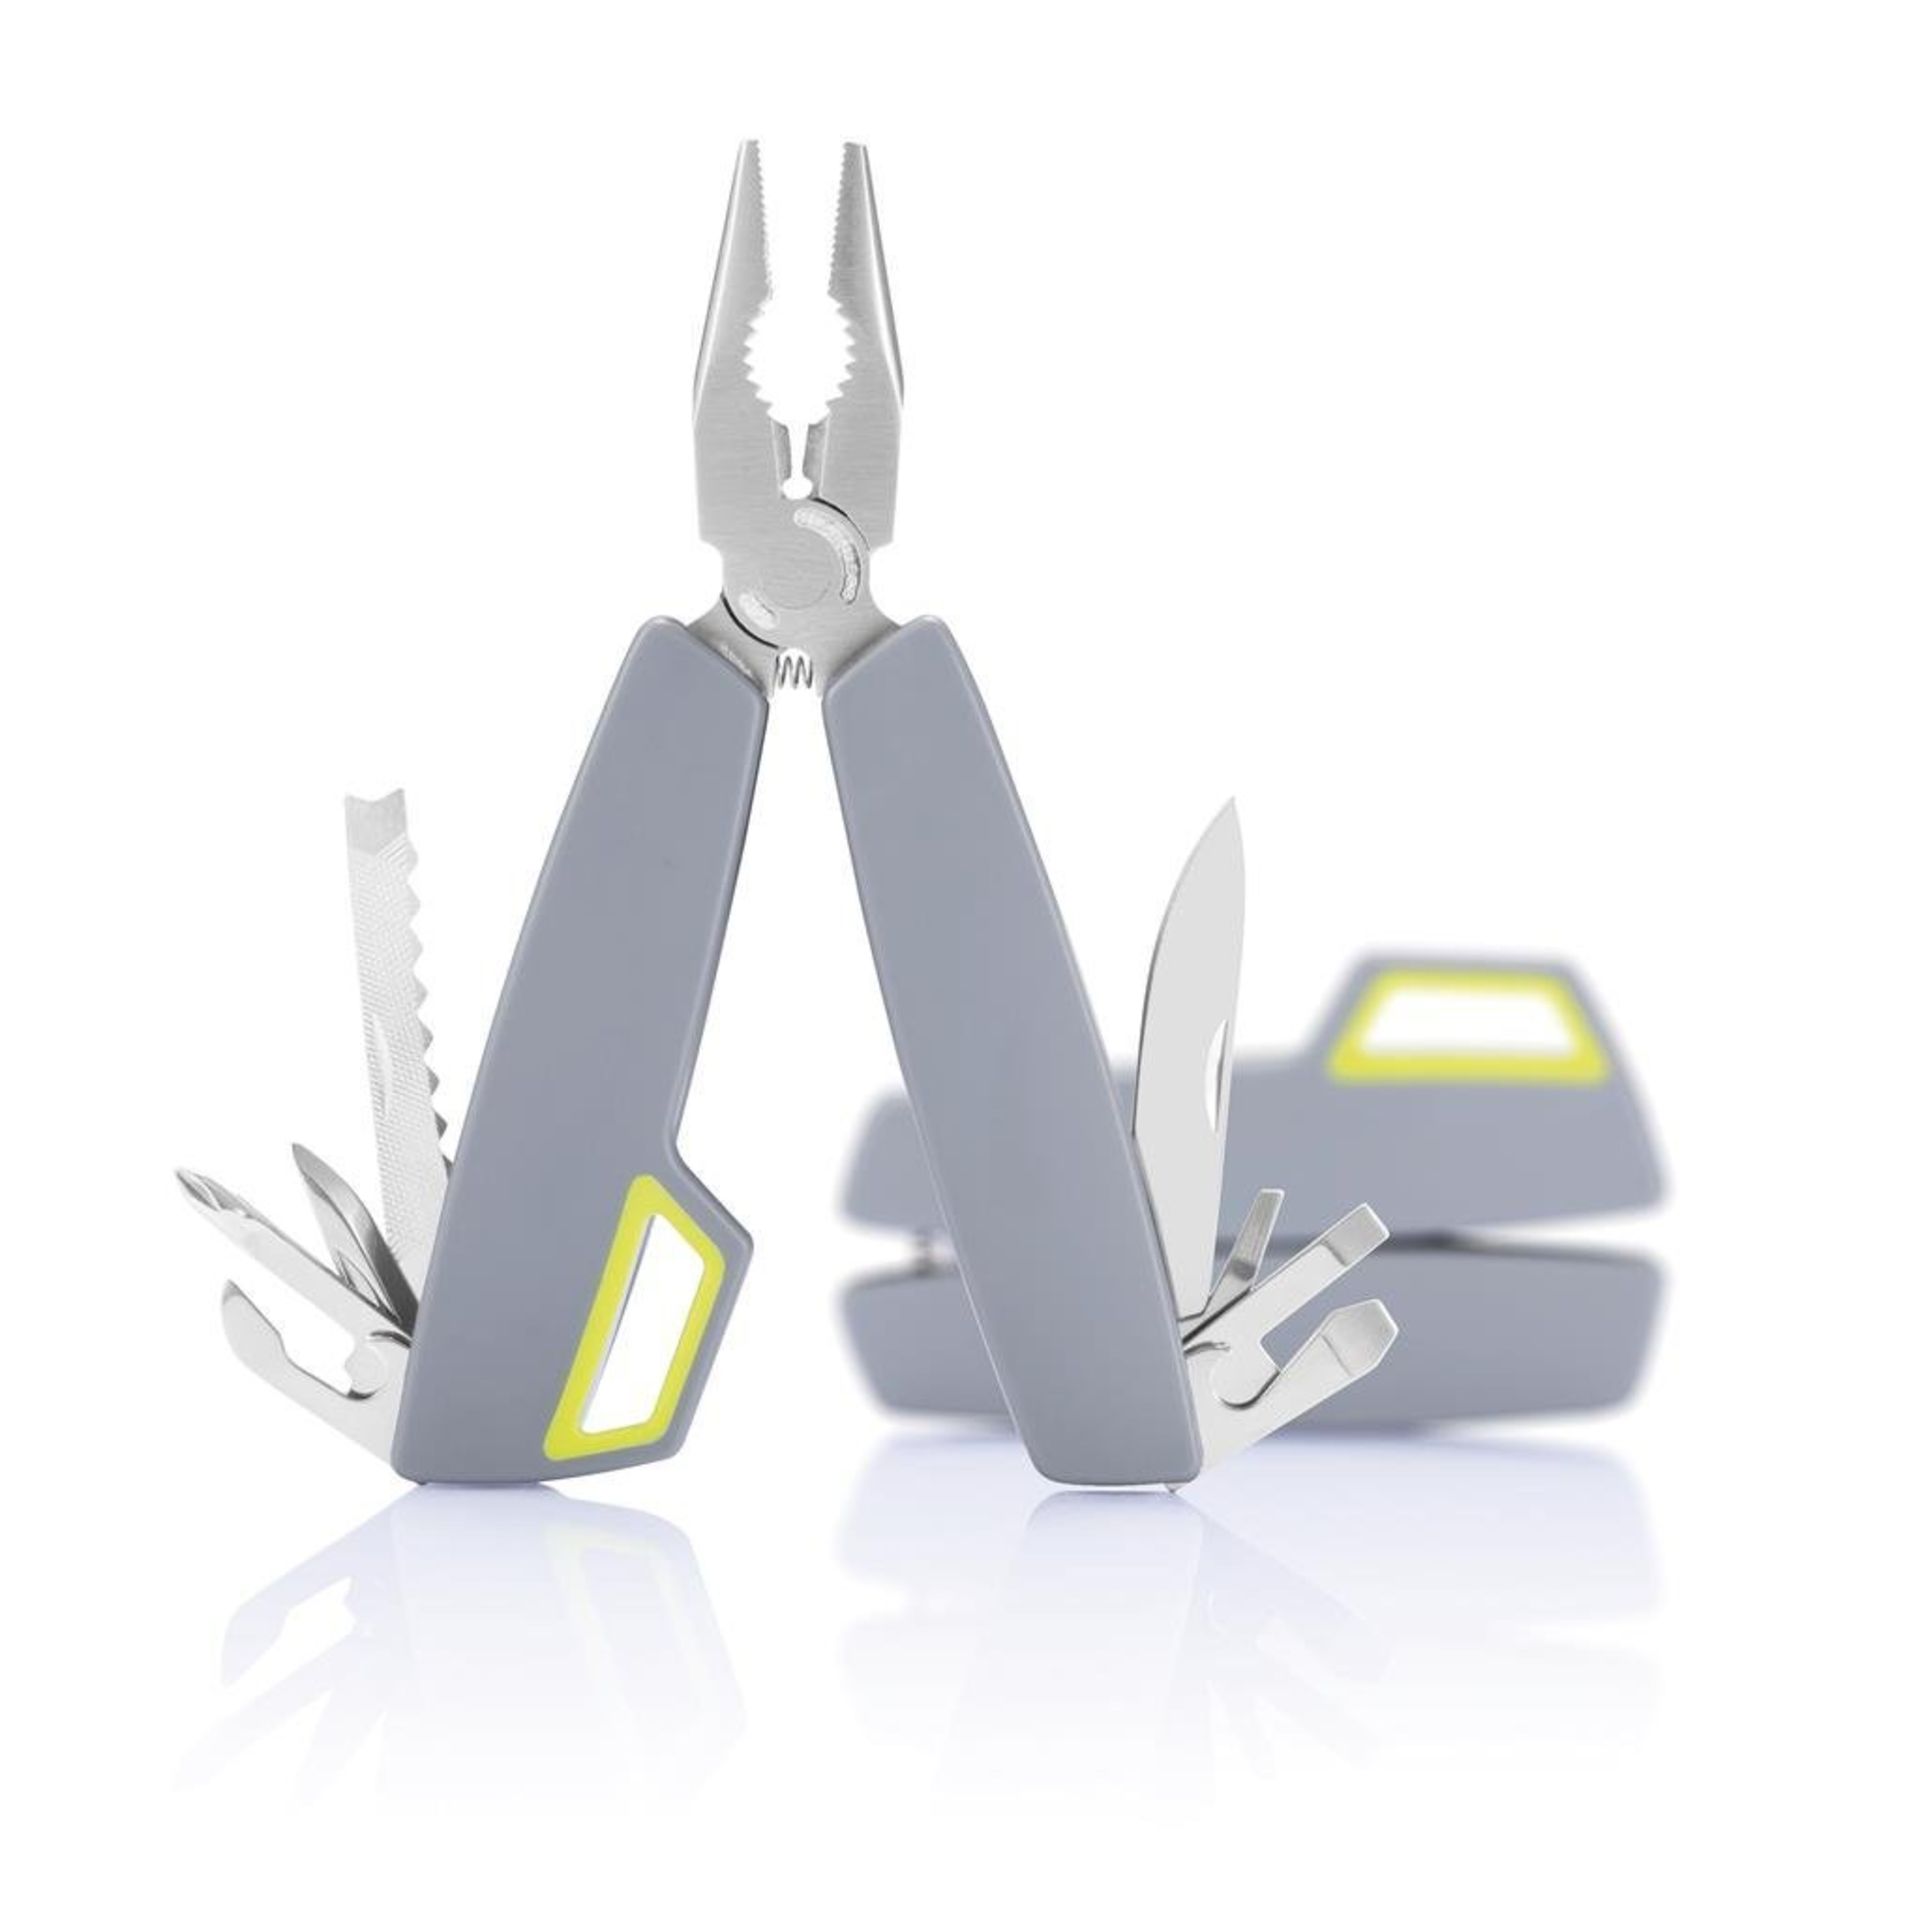 V *TRADE QTY* Brand New Tovo Multitool by XDDesign in Gift Box with Carry Pouch and Carabinier